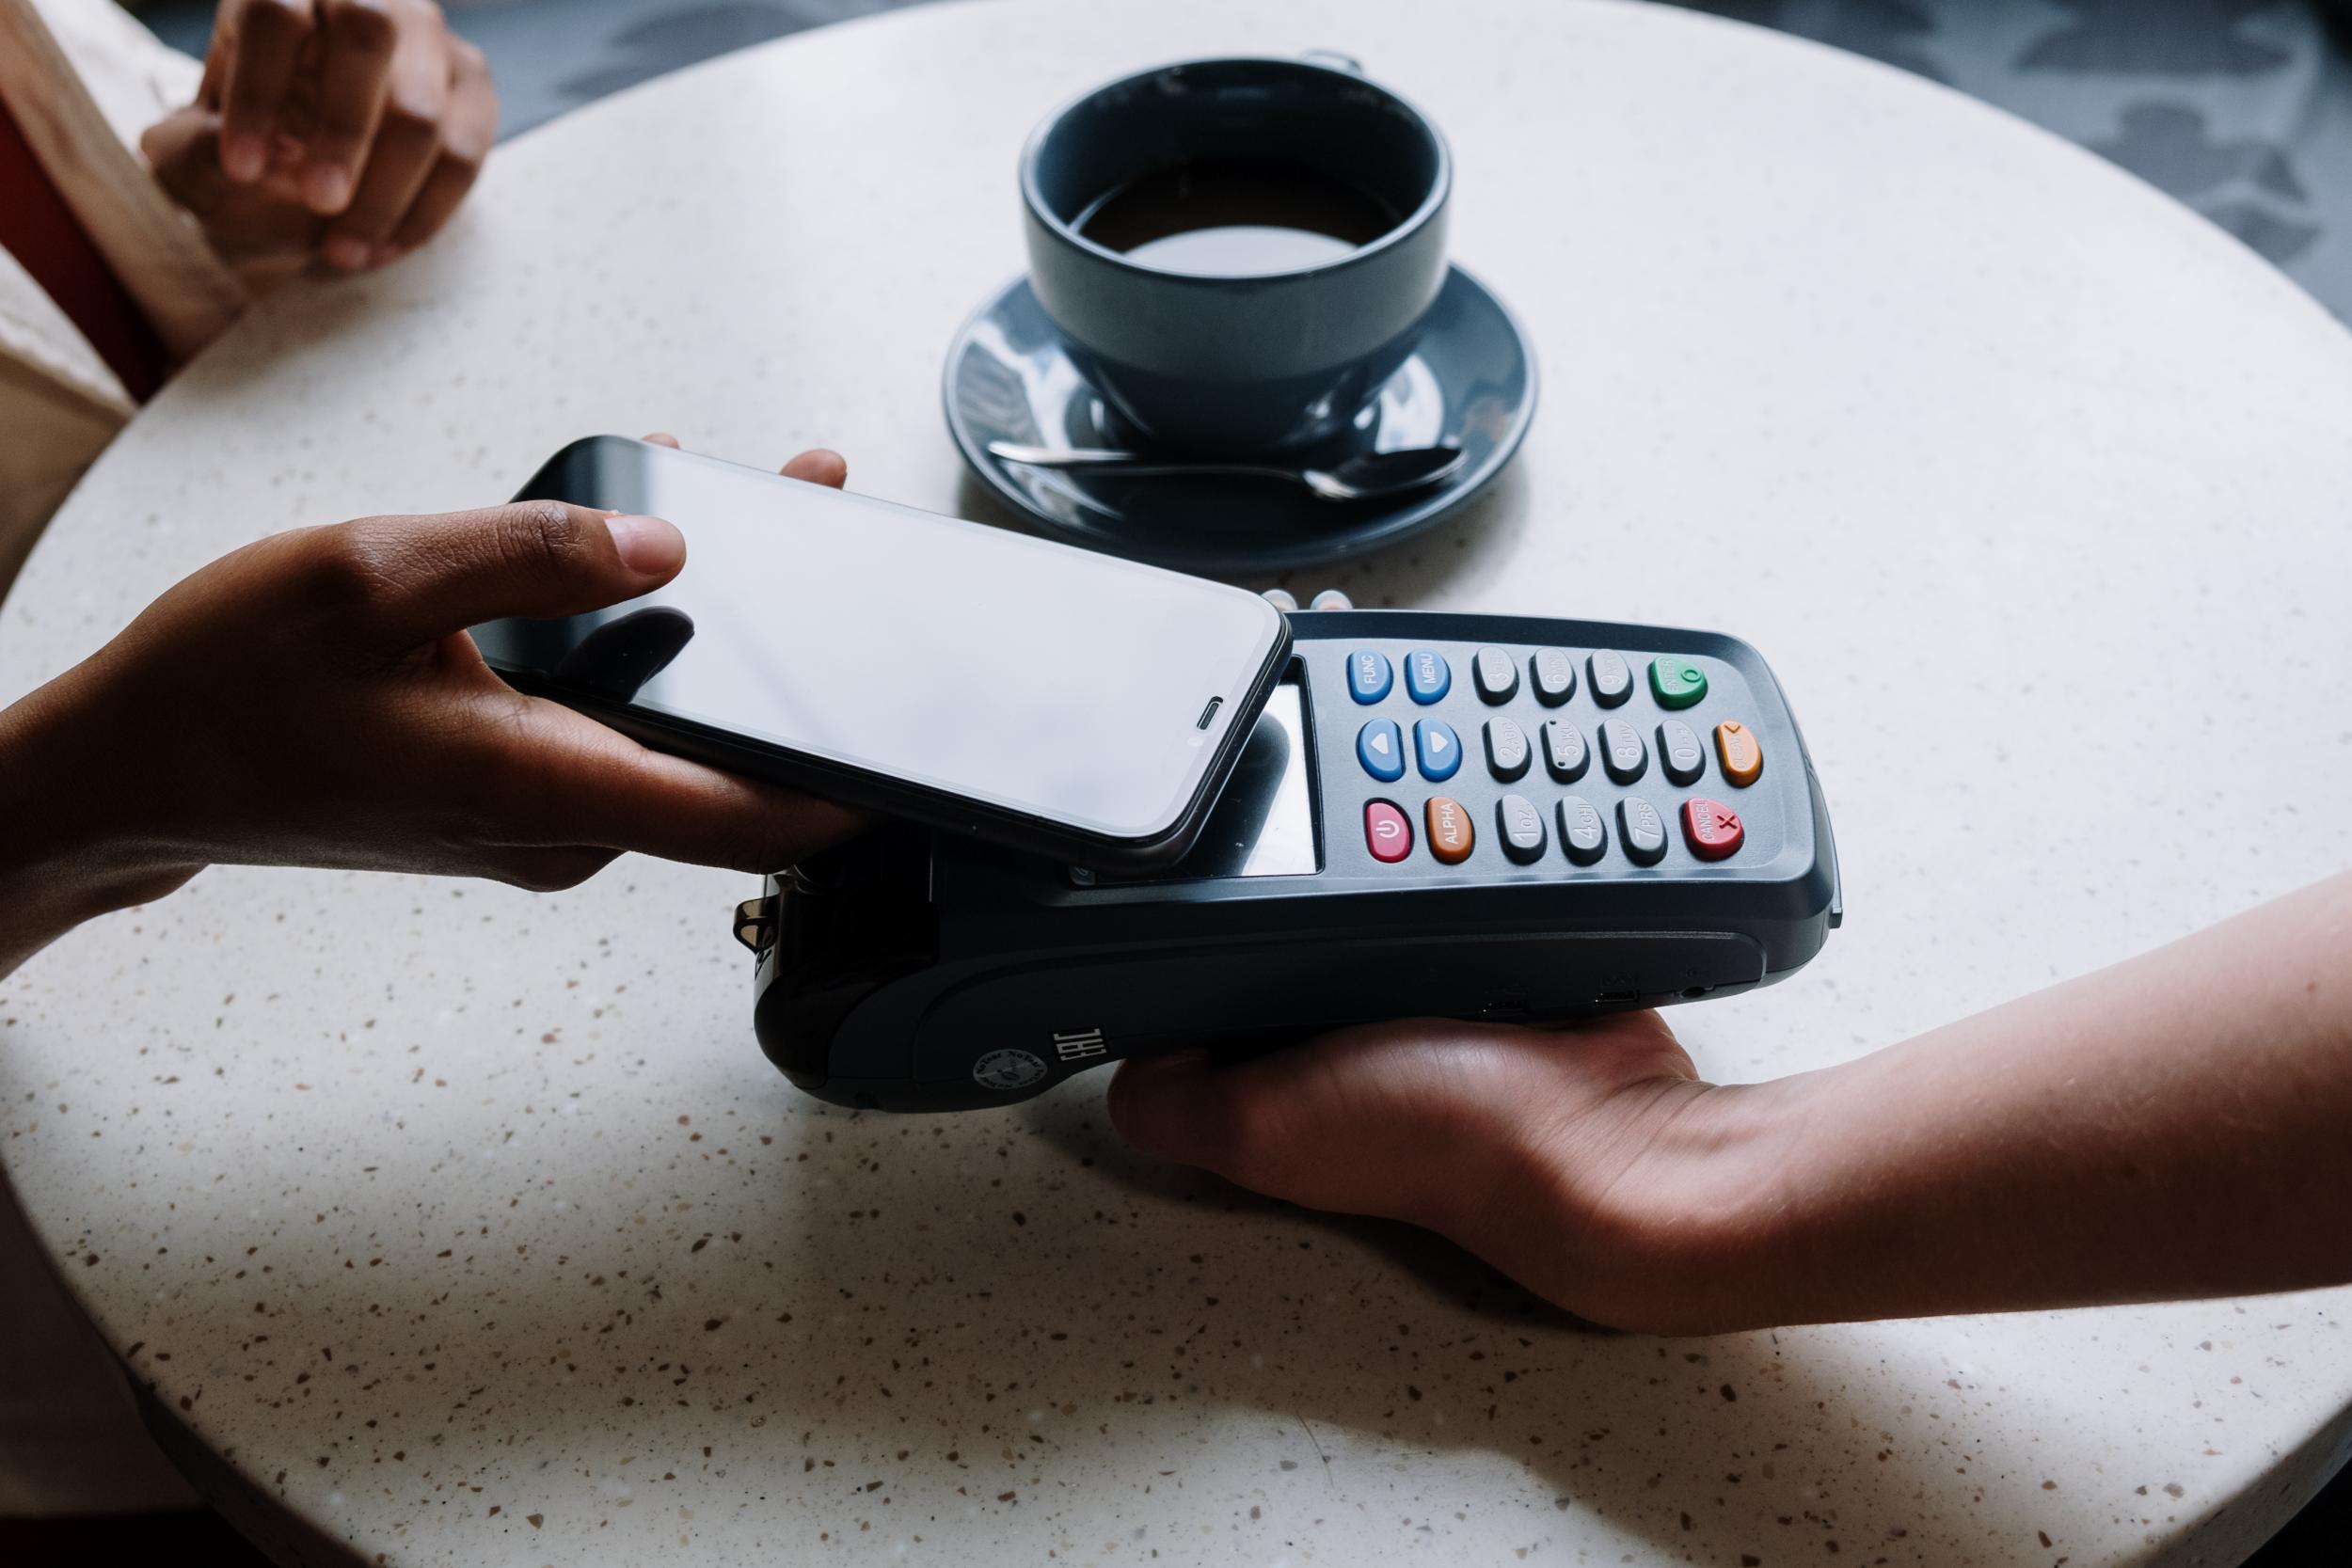 Want To Take Contactless Payments? Get Digital Processing Services In Tracy, CA